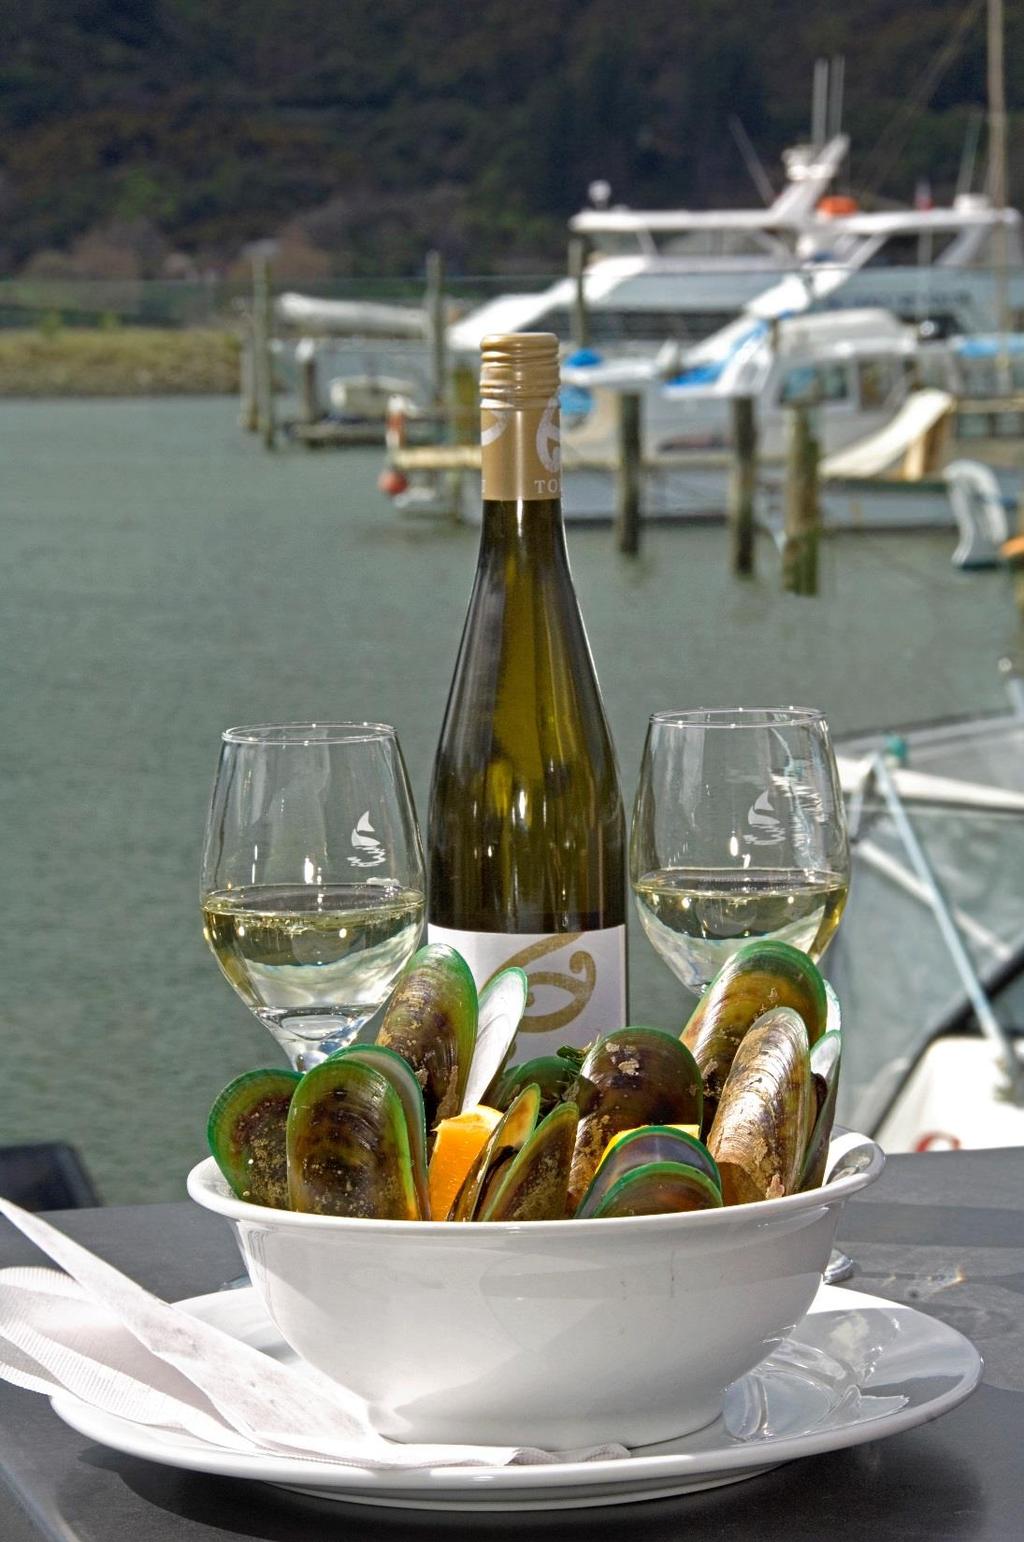 Indulge in Marlborough s wine and food 160 wineries, 37 cellar doors, boutique food producers and amazing seafood Experience Marlborough Tour Company s Greenshell Mussel or Seafood Odyssea